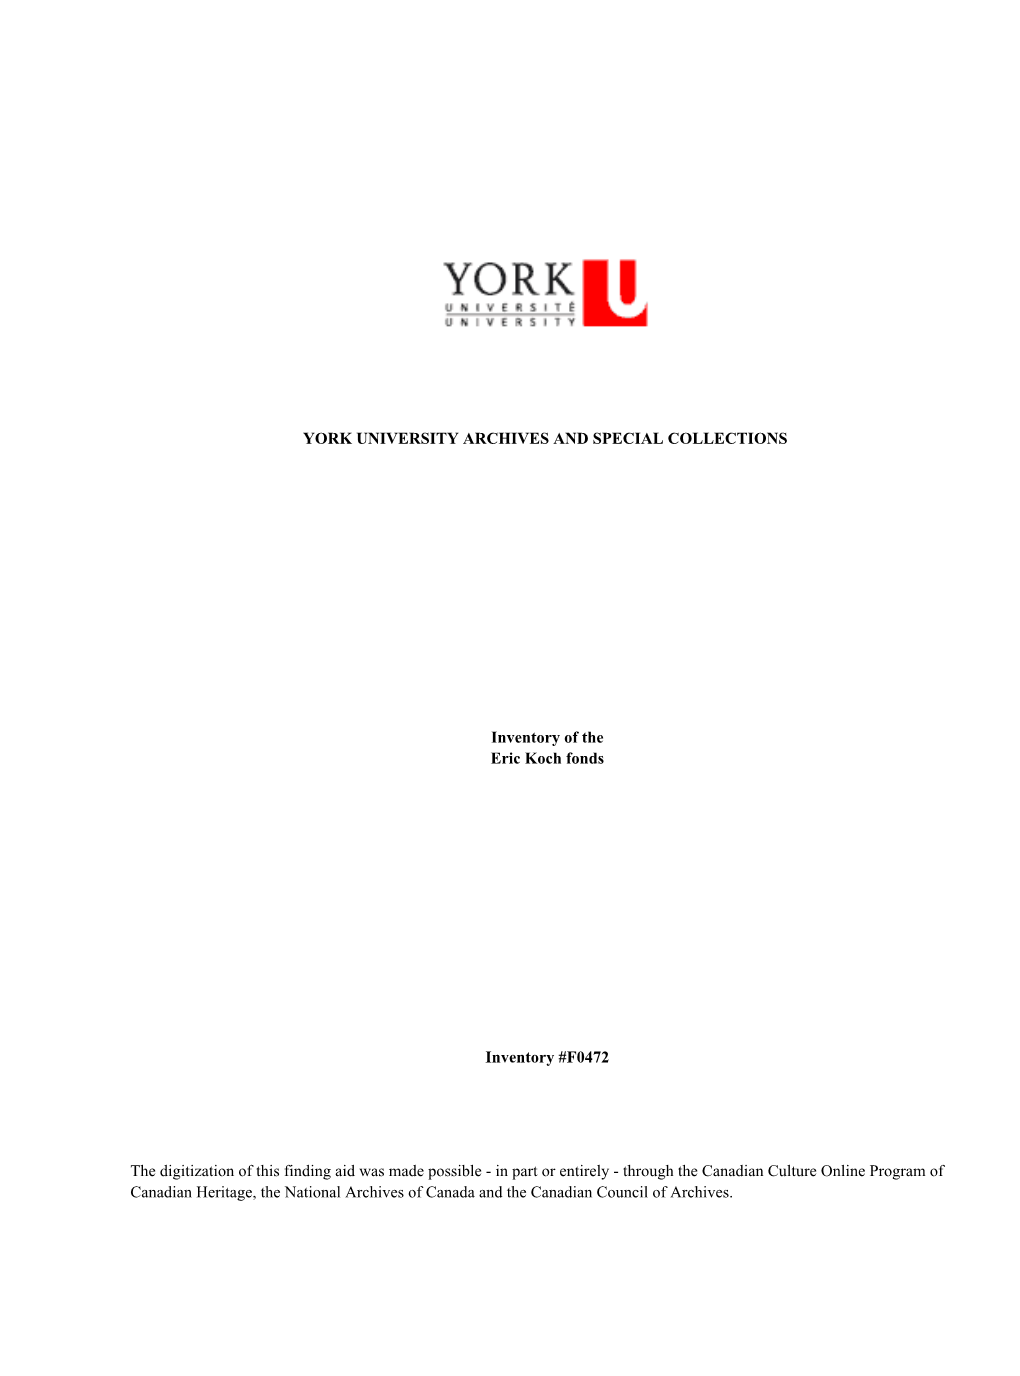 YORK UNIVERSITY ARCHIVES and SPECIAL COLLECTIONS Inventory